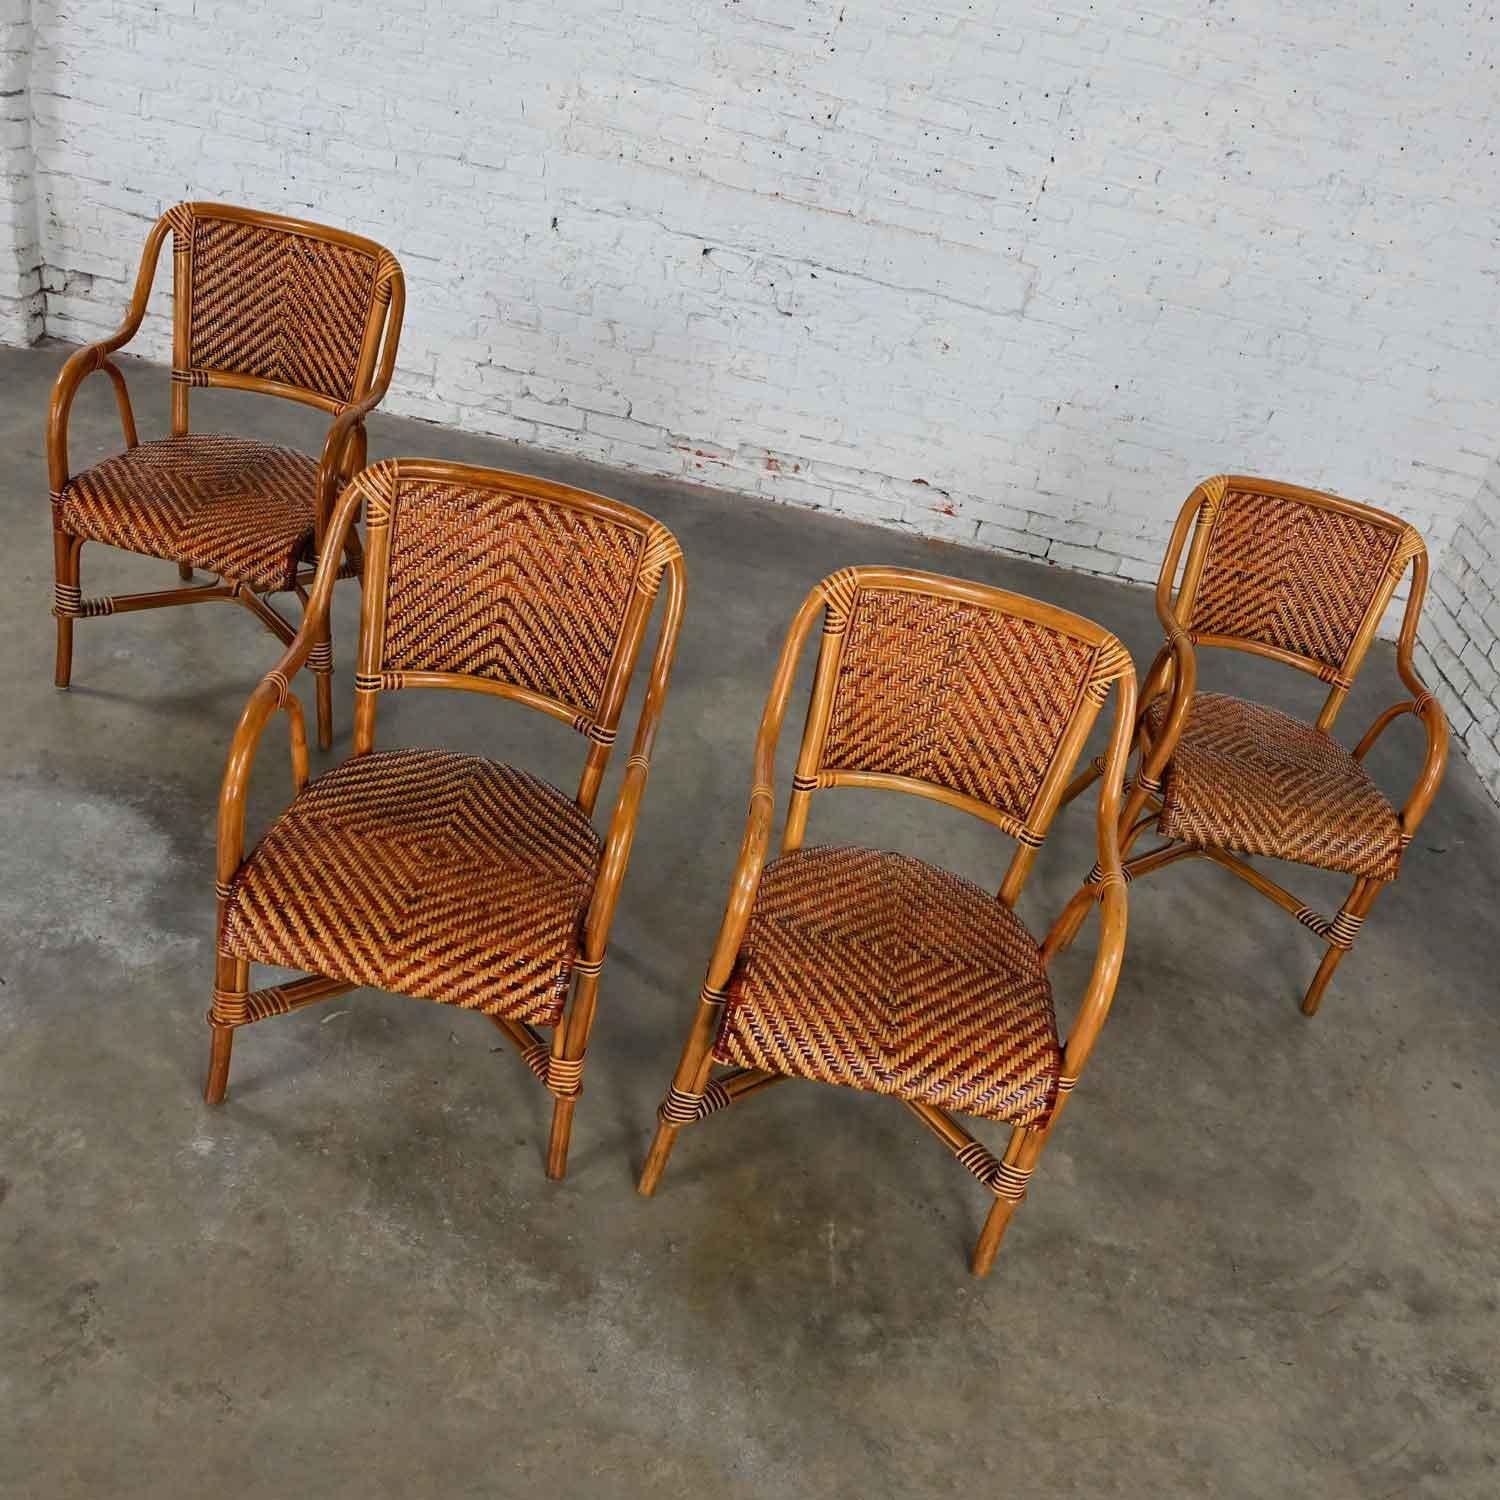 20th Century Boho Chic 2 Toned Wicker Rattan Café Bistro or Conservatory Armchairs Set of 4